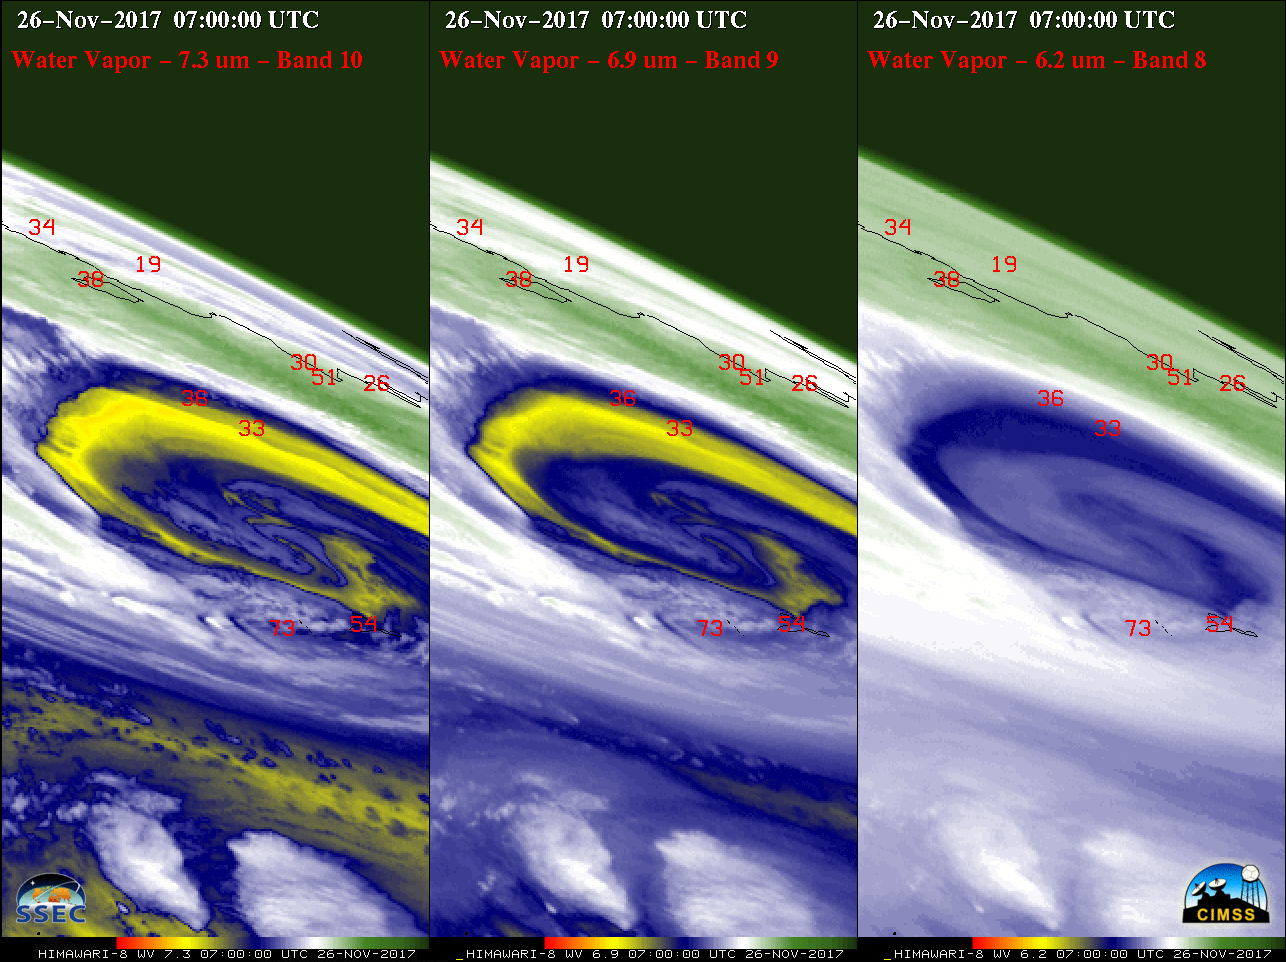 Himawari-8 Lower-level (7.3 µm, left), Mid-level (6.9 µm, center) and Upper-level (6.2 µm, right) Water Vapor images, with hourly surface wind gusts (knots) plotted in red [click to play MP4 animation]